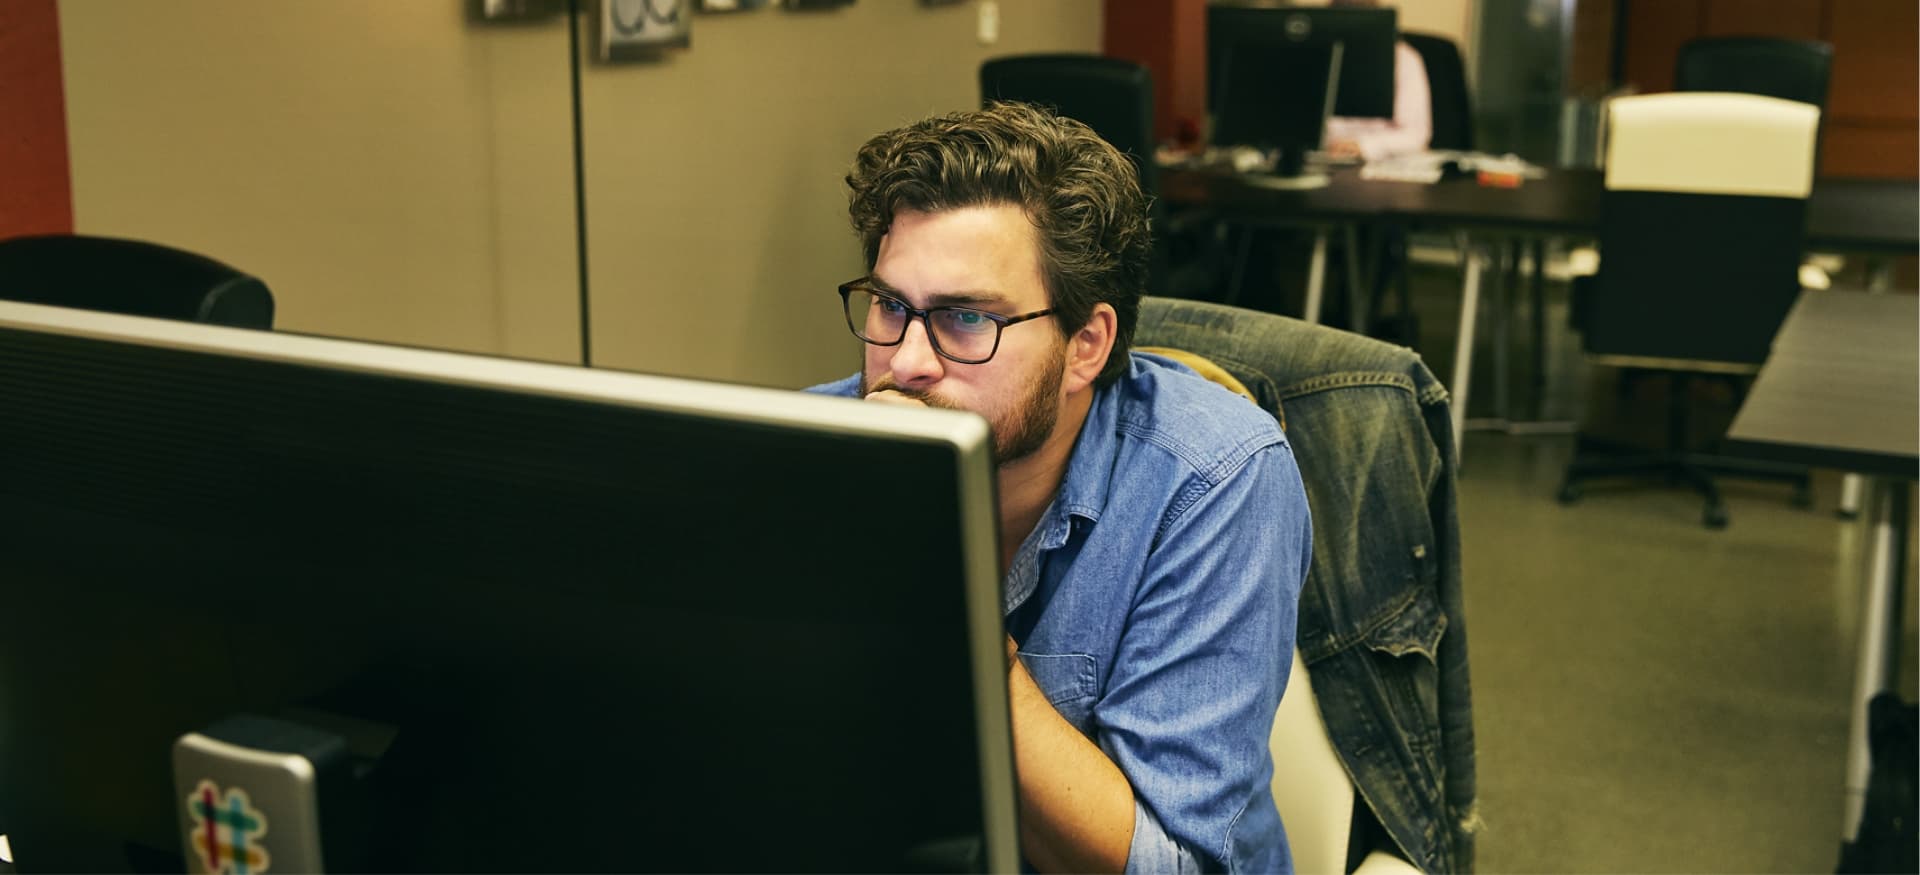 Man leans toward computer screen in coworking space.